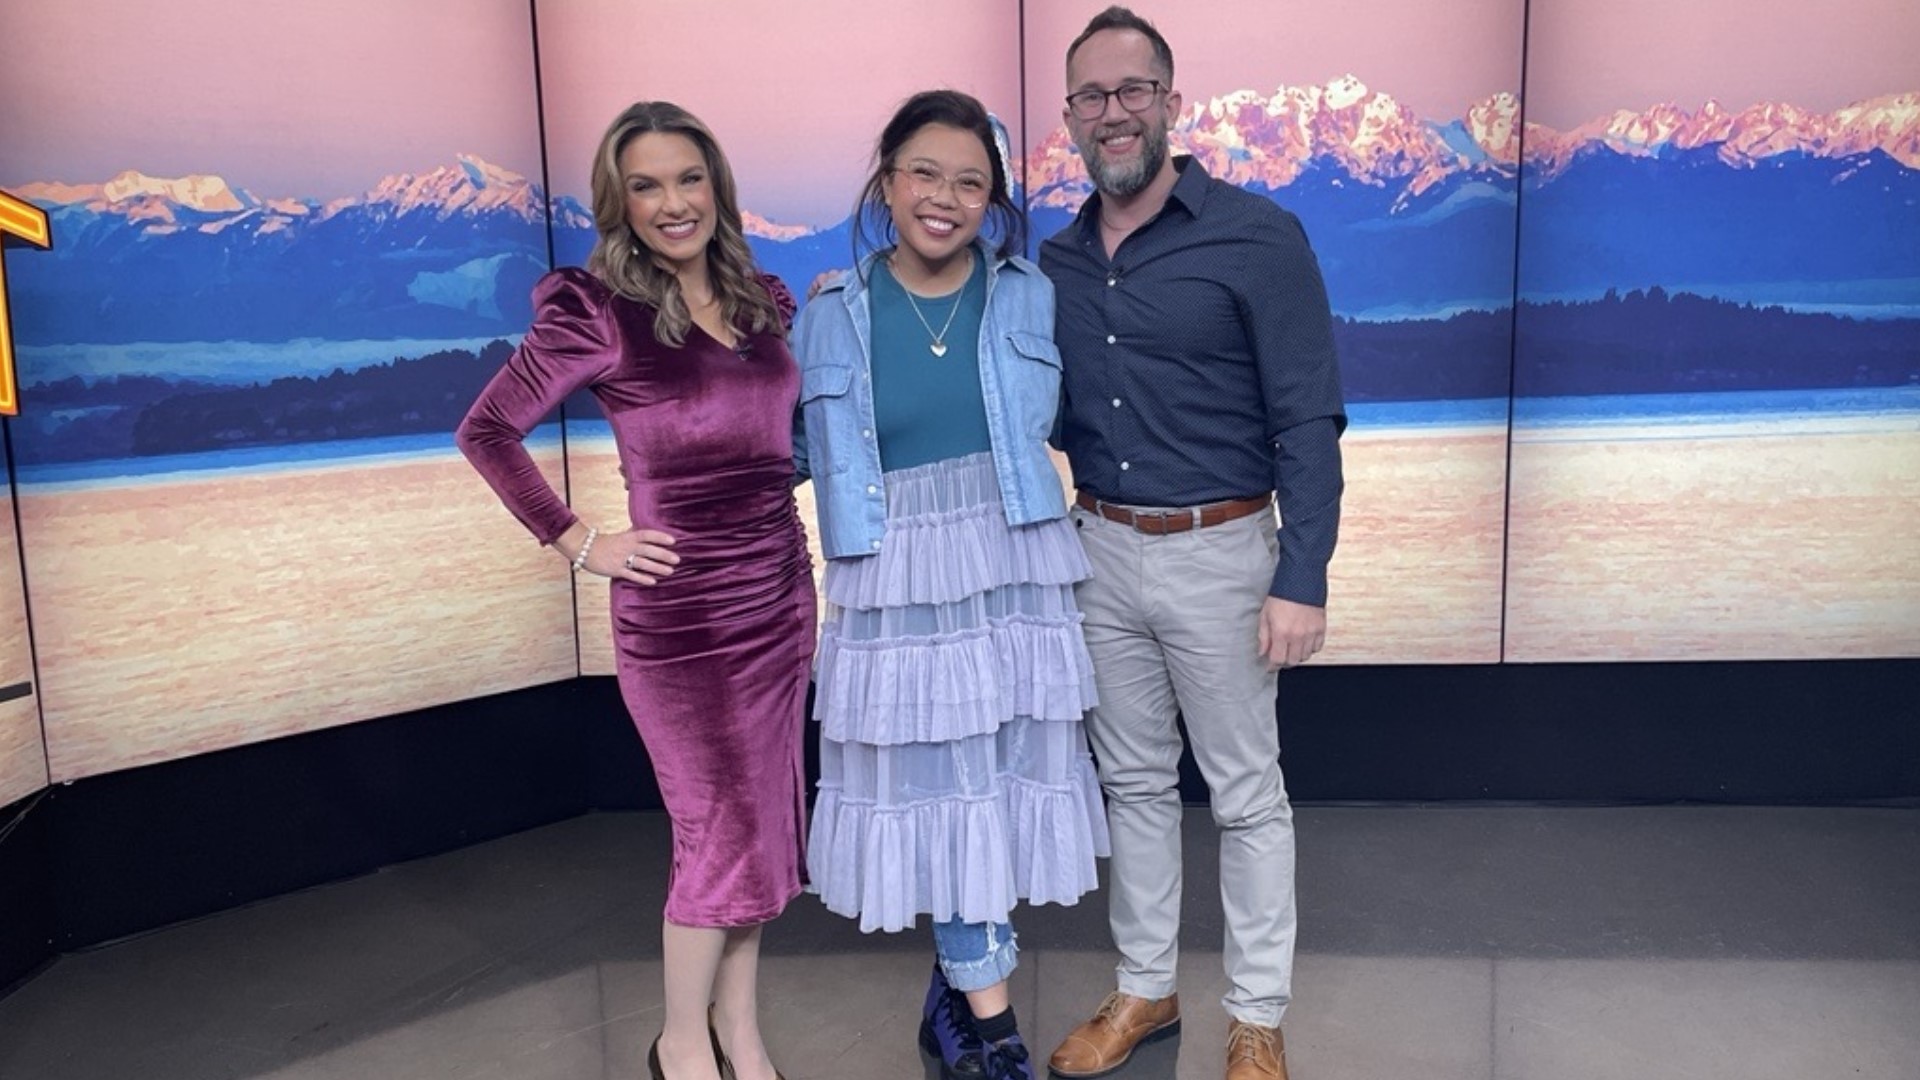 Ays Garcia performs "In My Own Little Corner" from "Rodgers and Hammerstein's Cinderella" playing now at the Village Theater Issaquah. #newdaynw